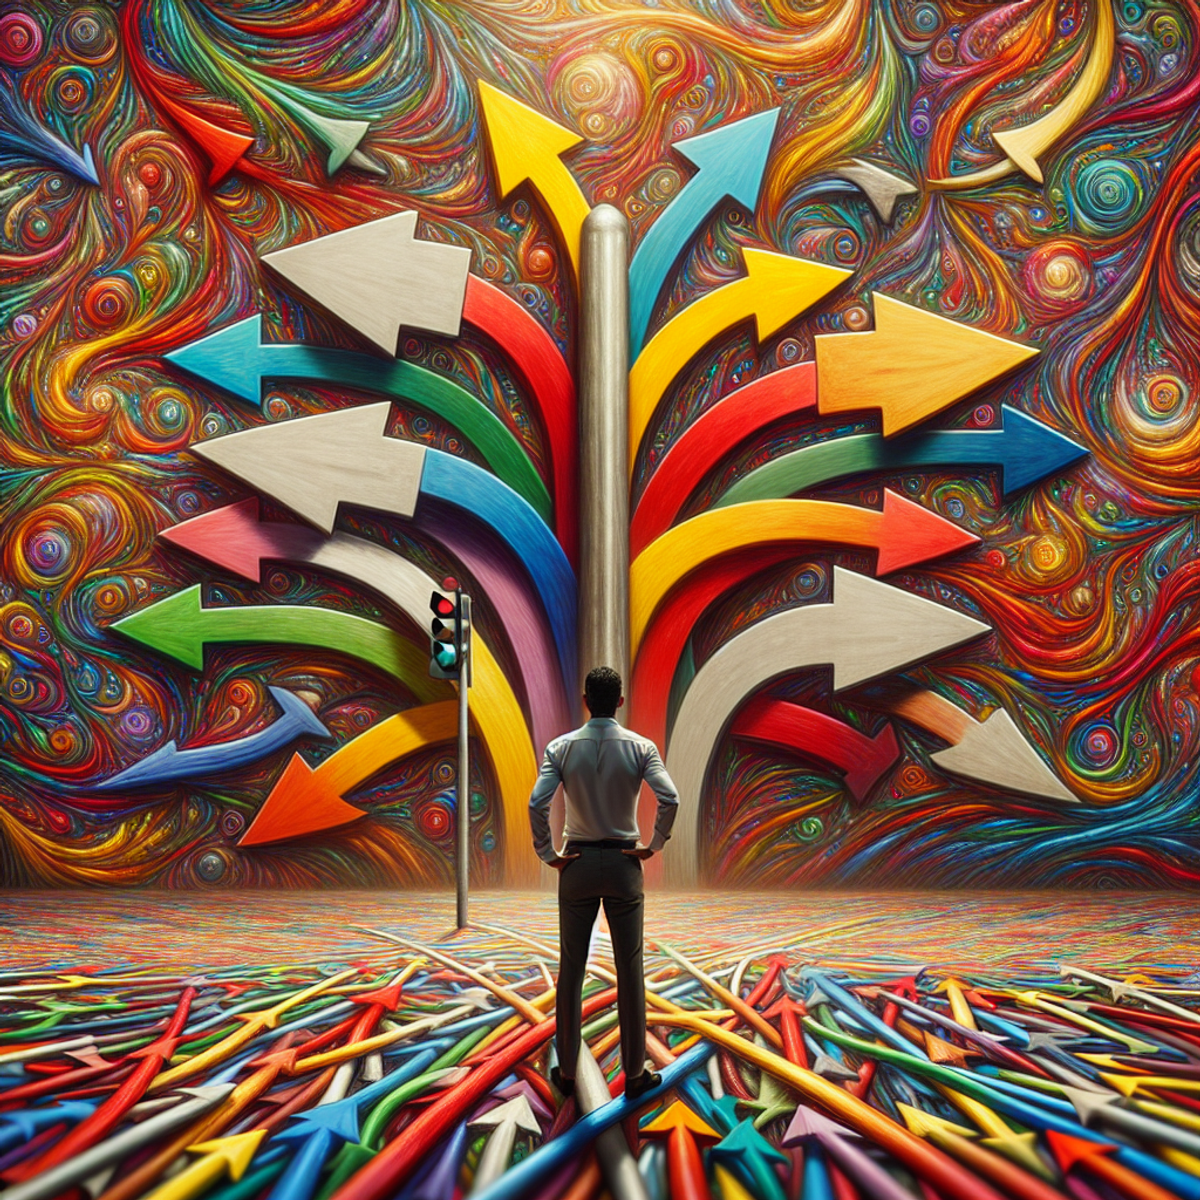 A person standing at a crossroads with colorful arrows pointing in different directions.